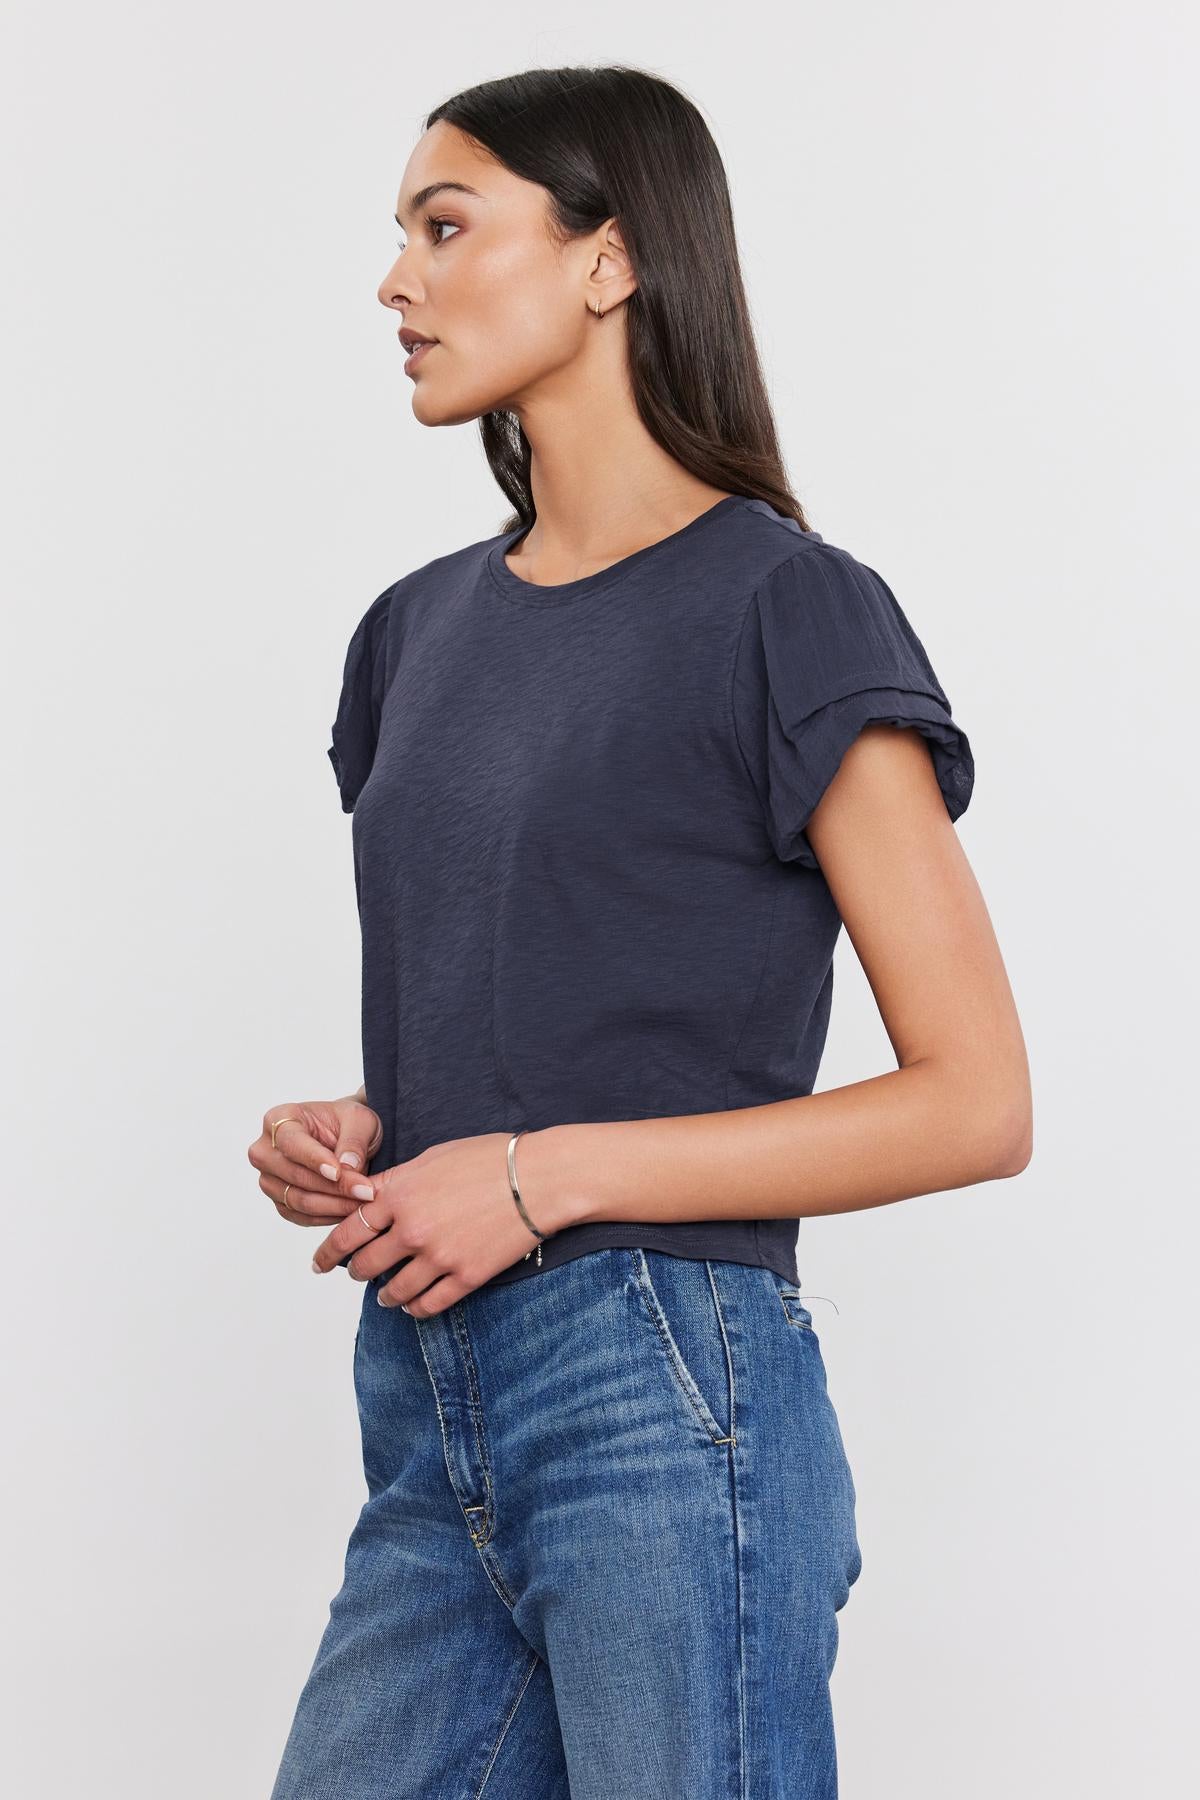 Profile view of a woman in a dark blue Della Tee by Velvet by Graham & Spencer with pleated sleeve detail and blue jeans, standing against a white background.-36805187305665